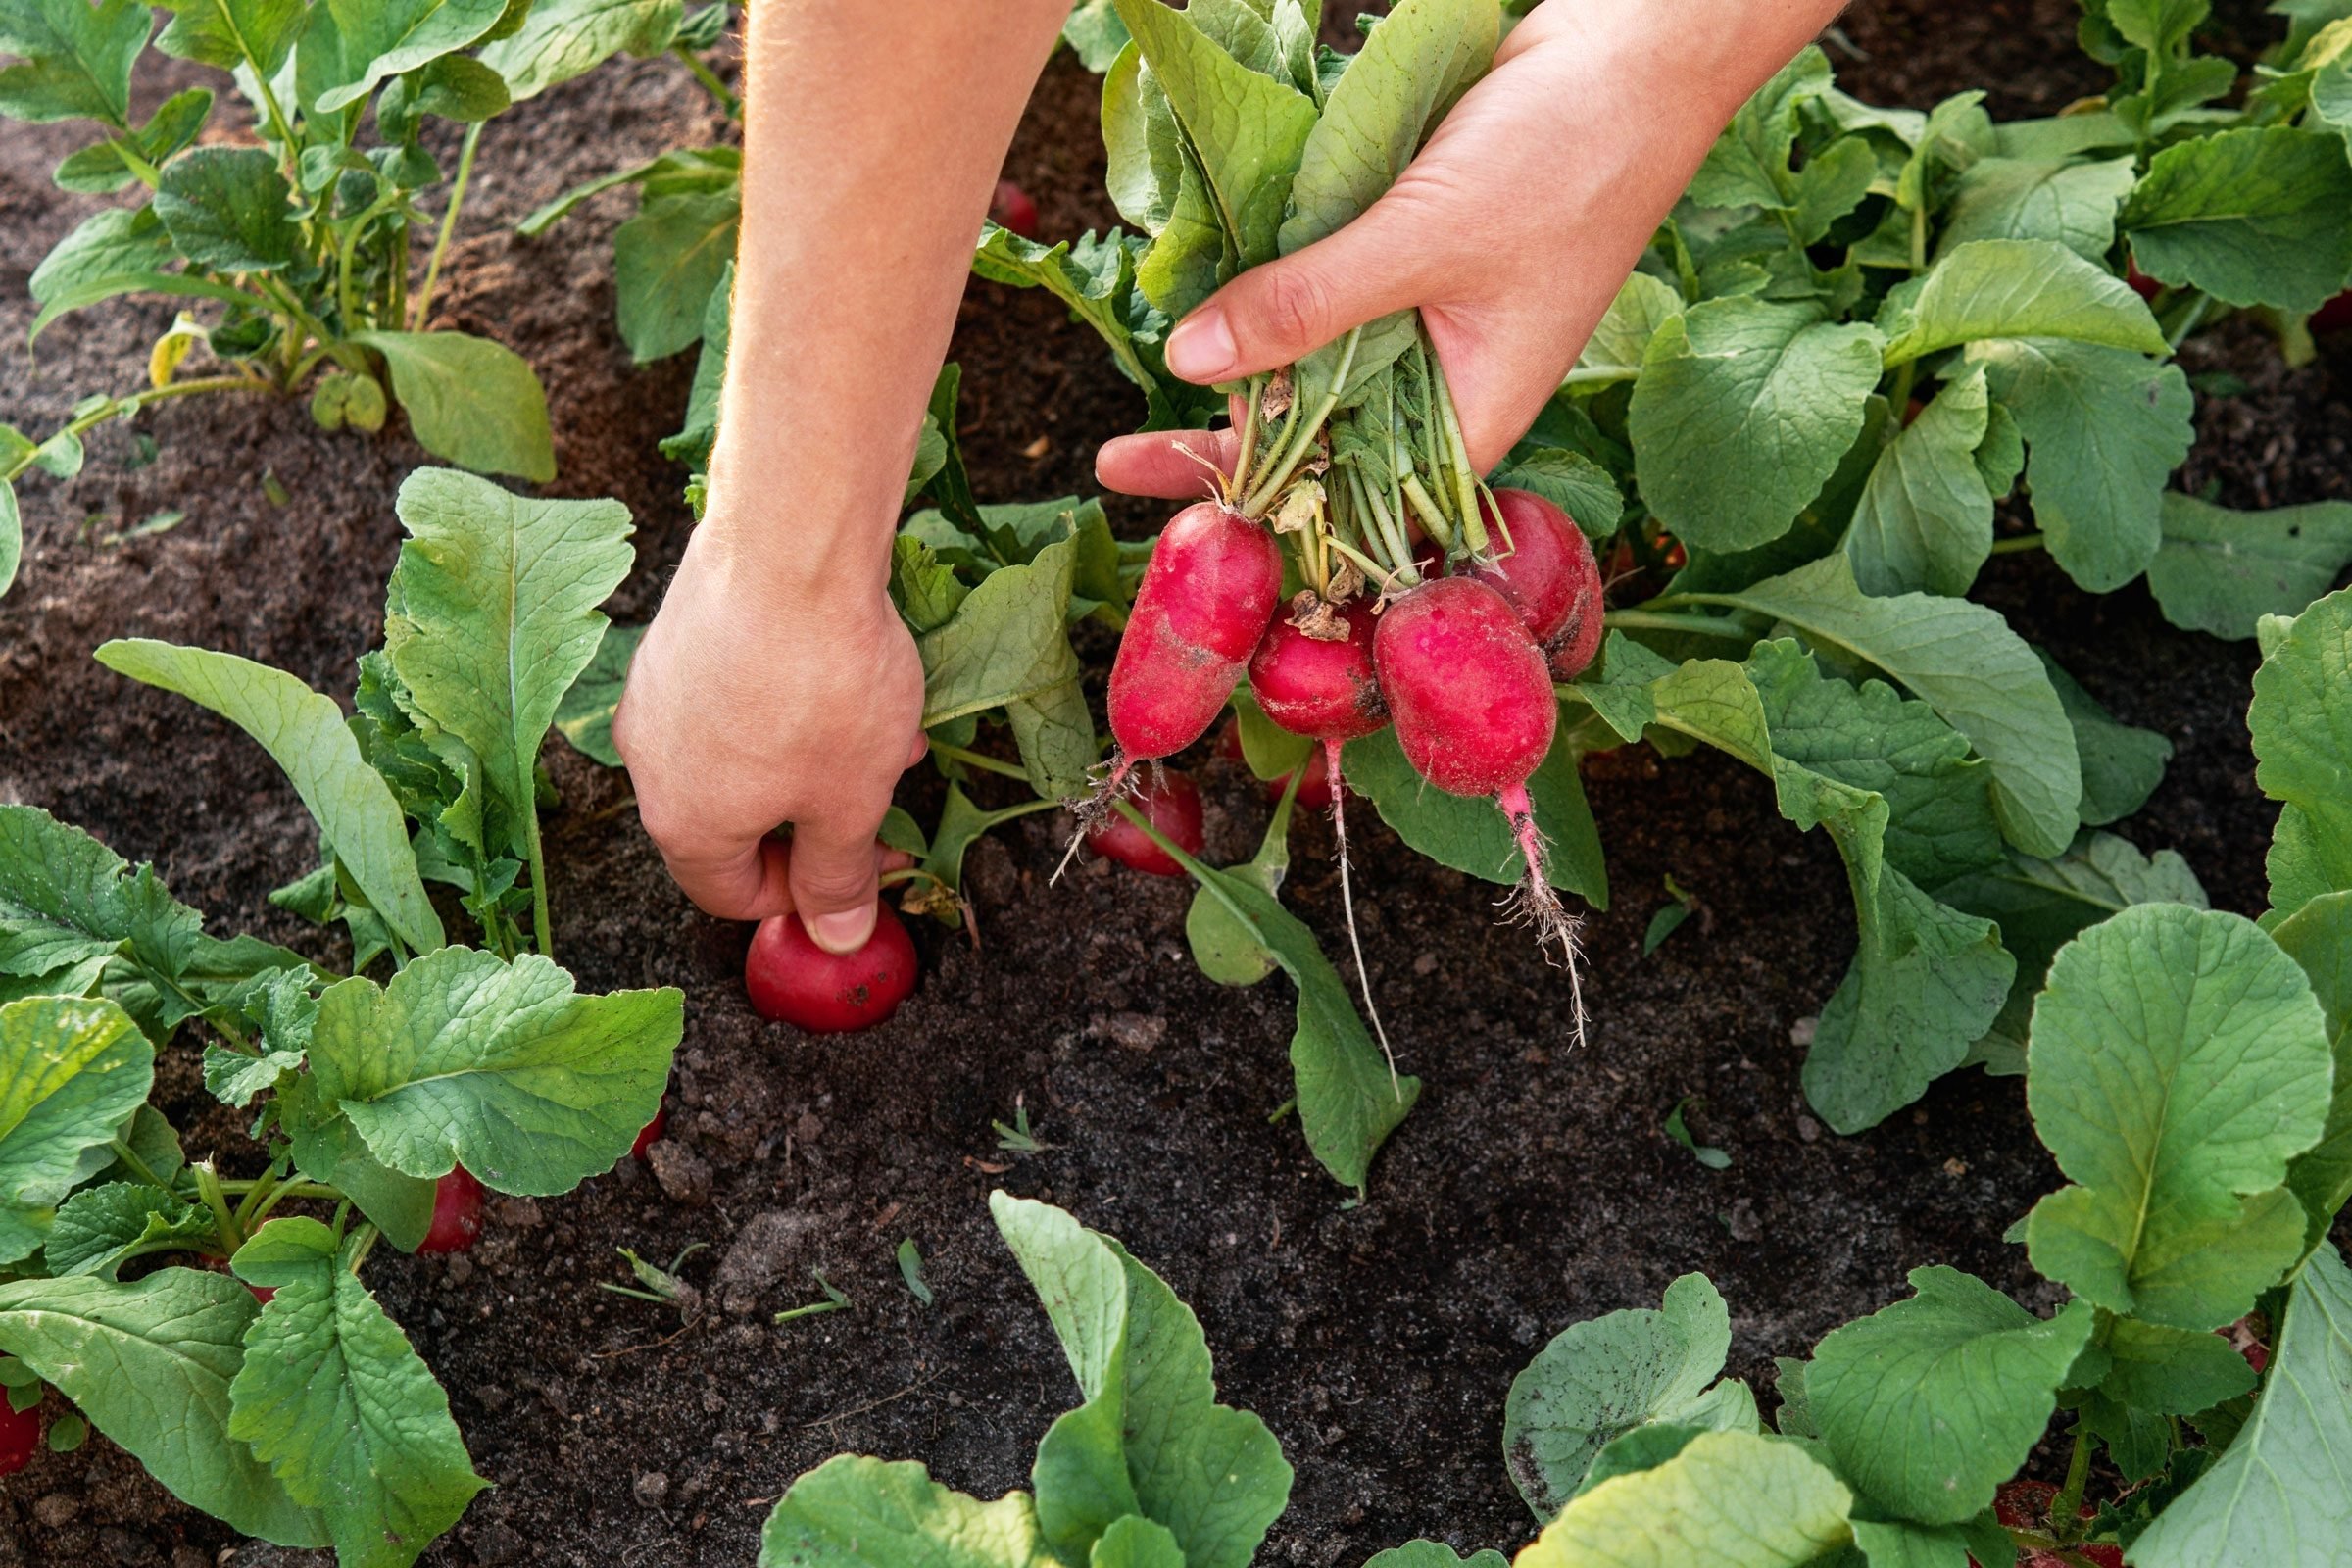 hand harvesting radishes from the garden